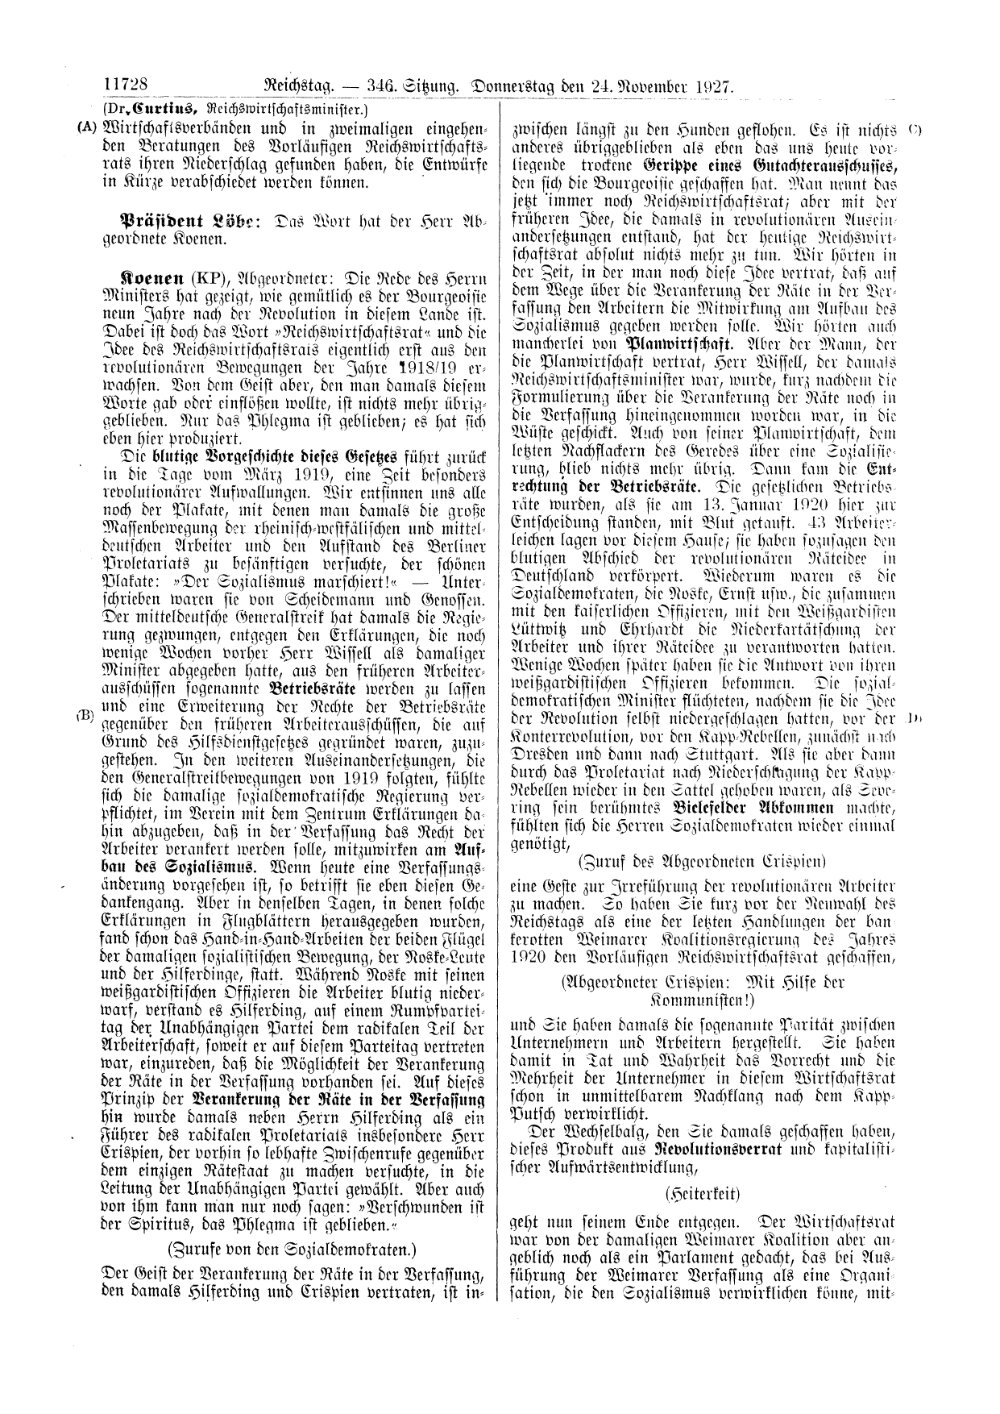 Scan of page 11728